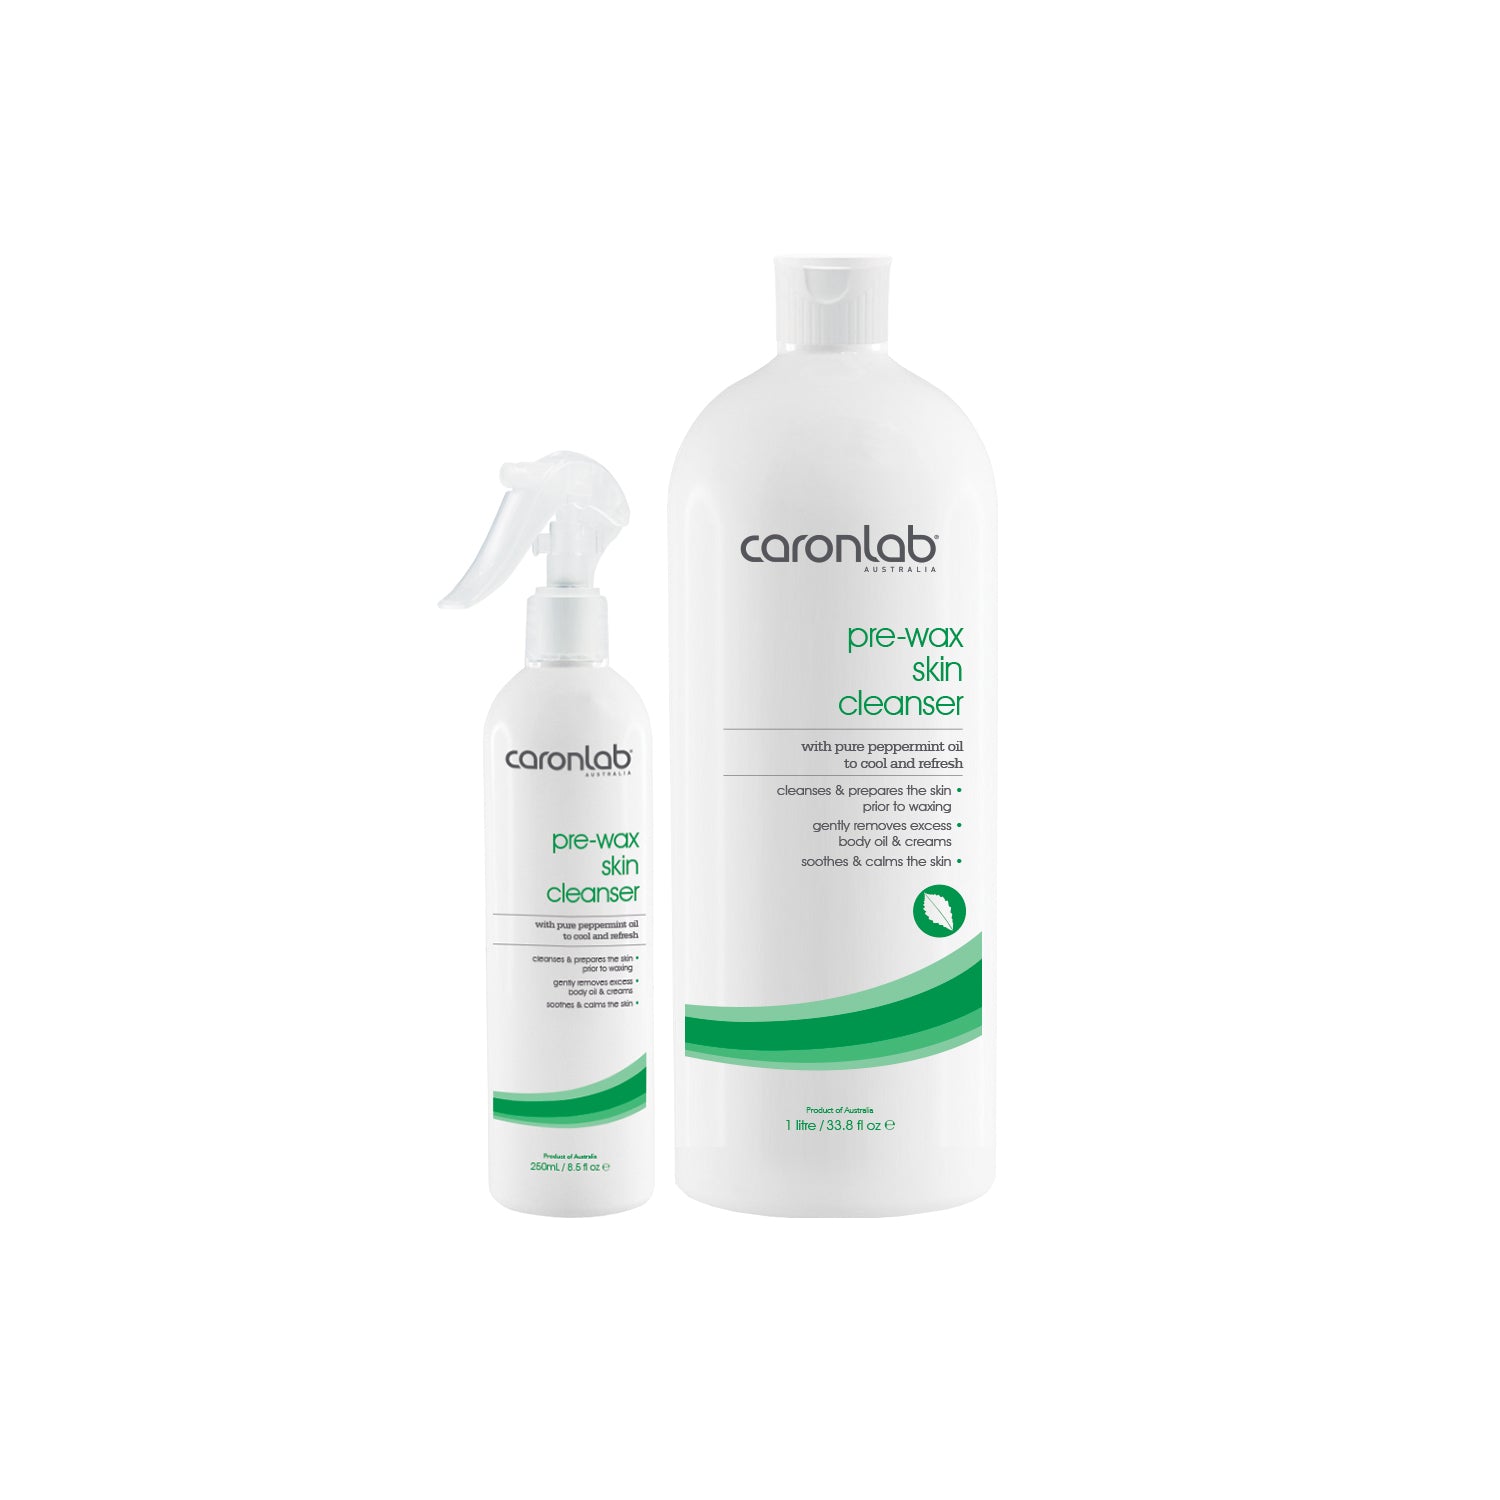 Caronlab - Pre-Wax Skin Cleanser Refill - Creata Beauty - Professional Beauty Products